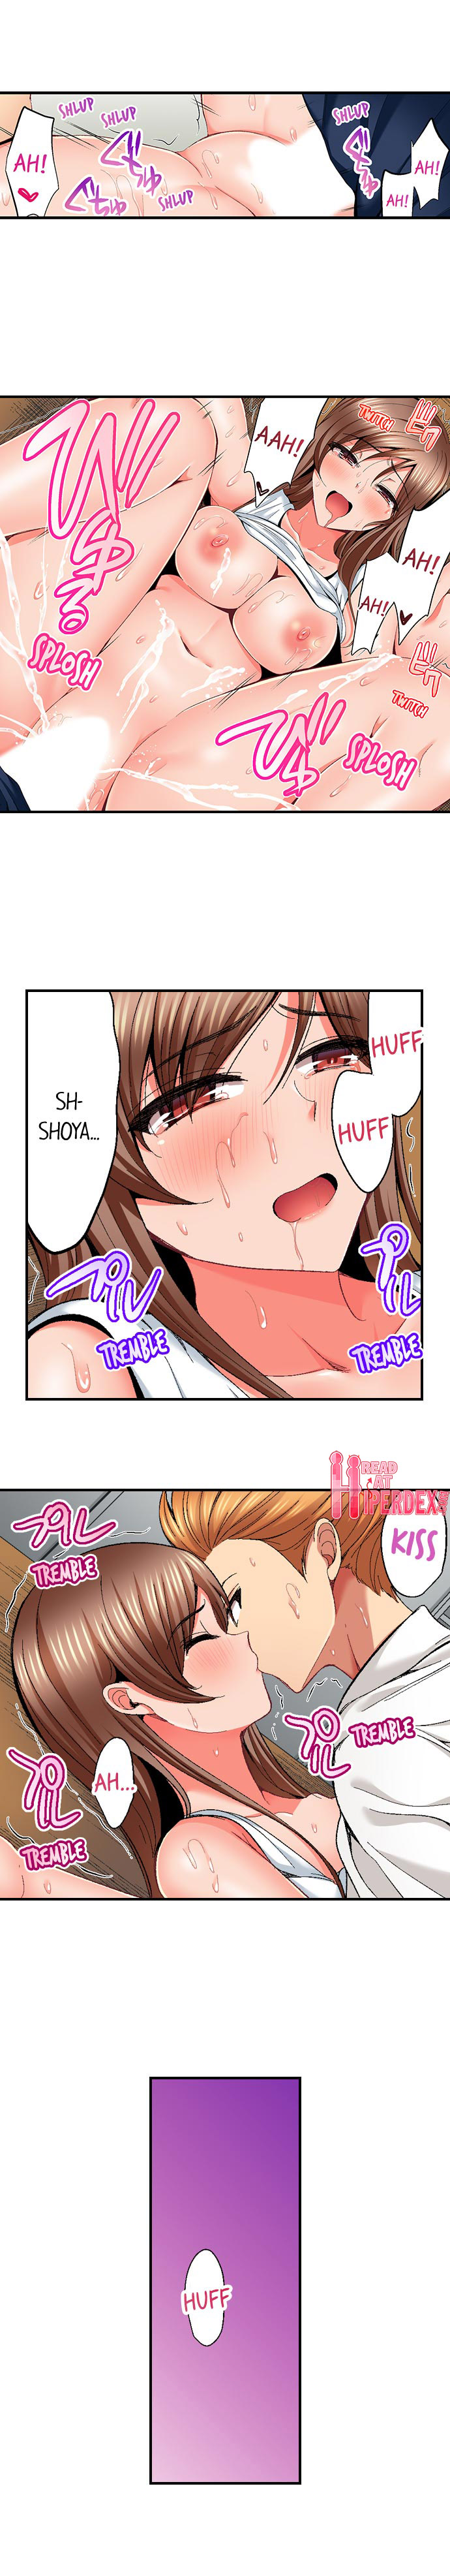 Netorare My Teacher With My Friends - Chapter 18 Page 8